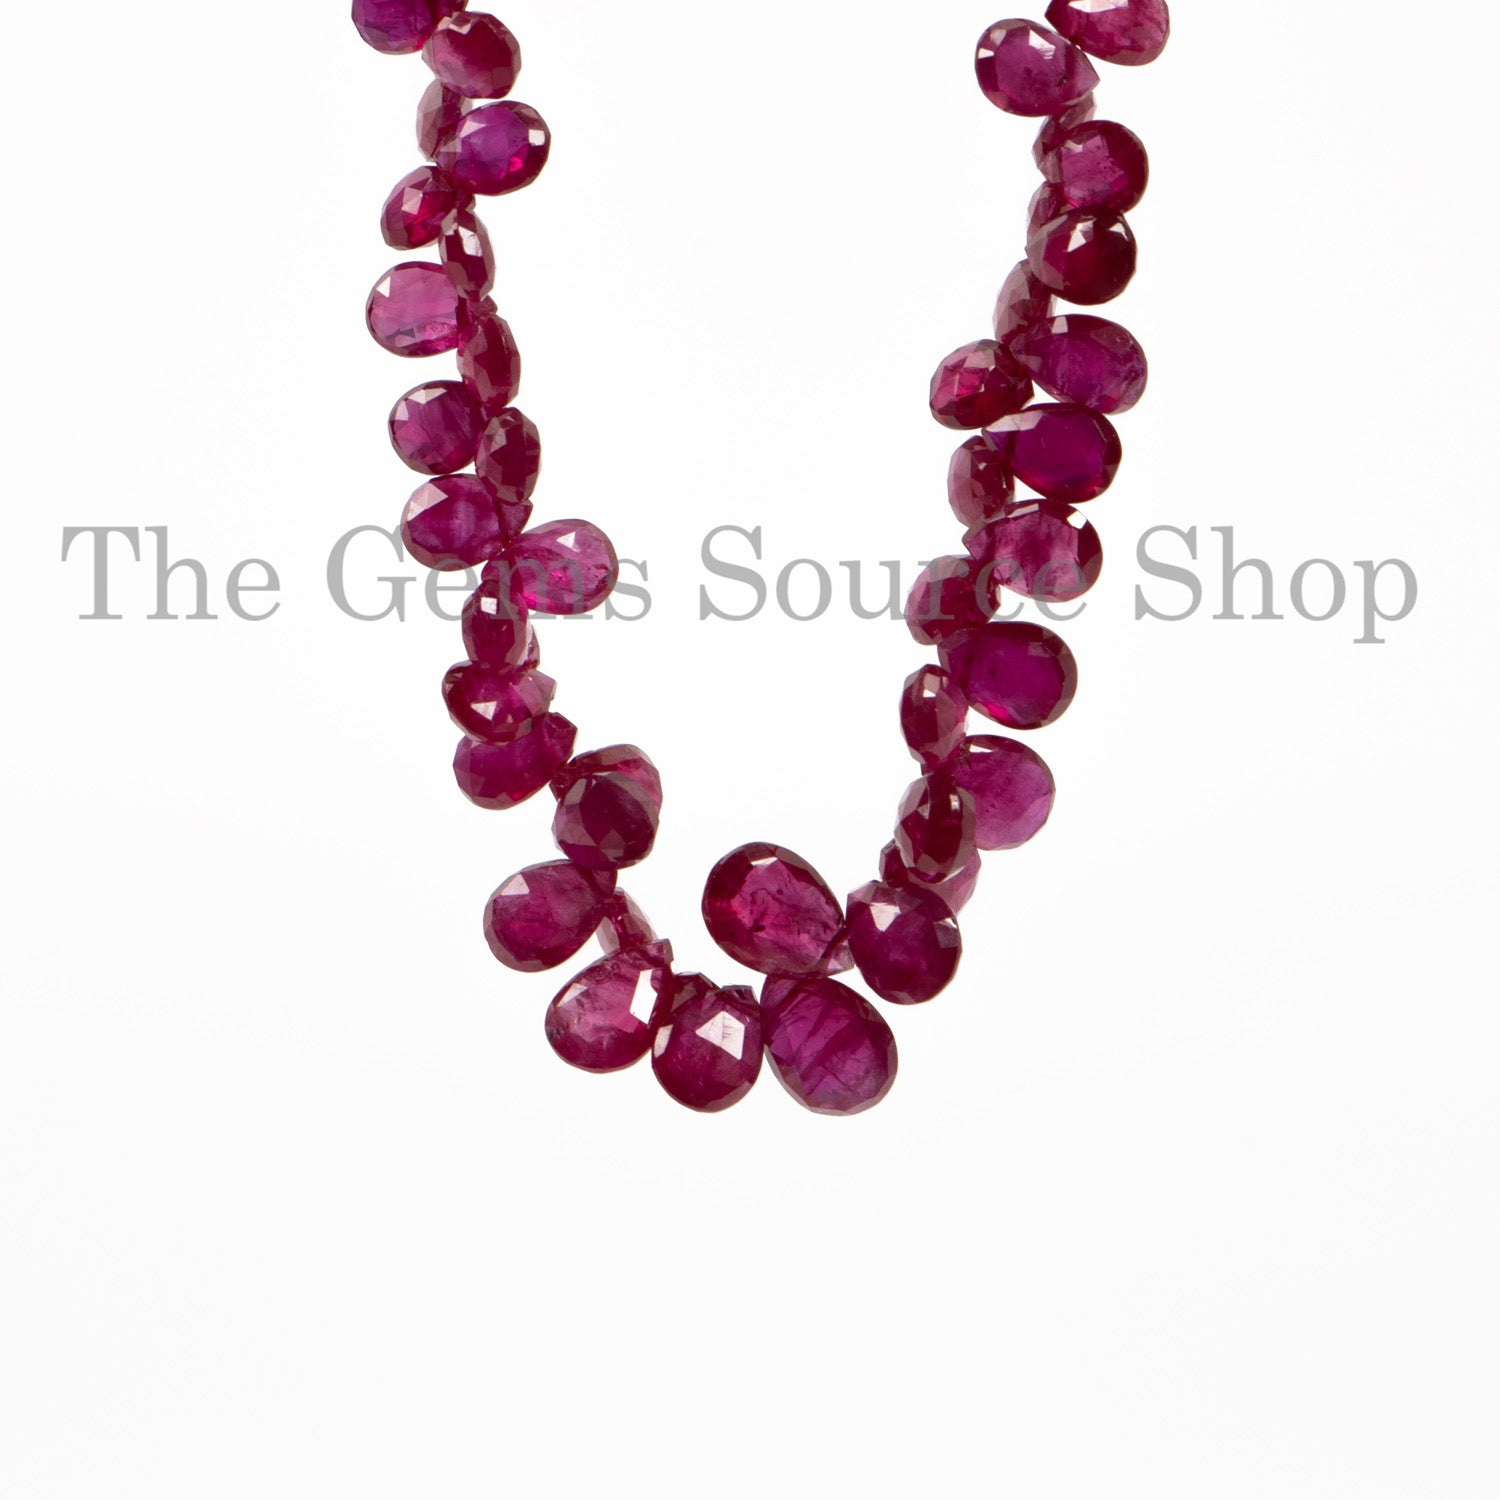 Natural Rare Burma Ruby Faceted Pear Beads, Super Top Quality Gemstone Beads Briolette